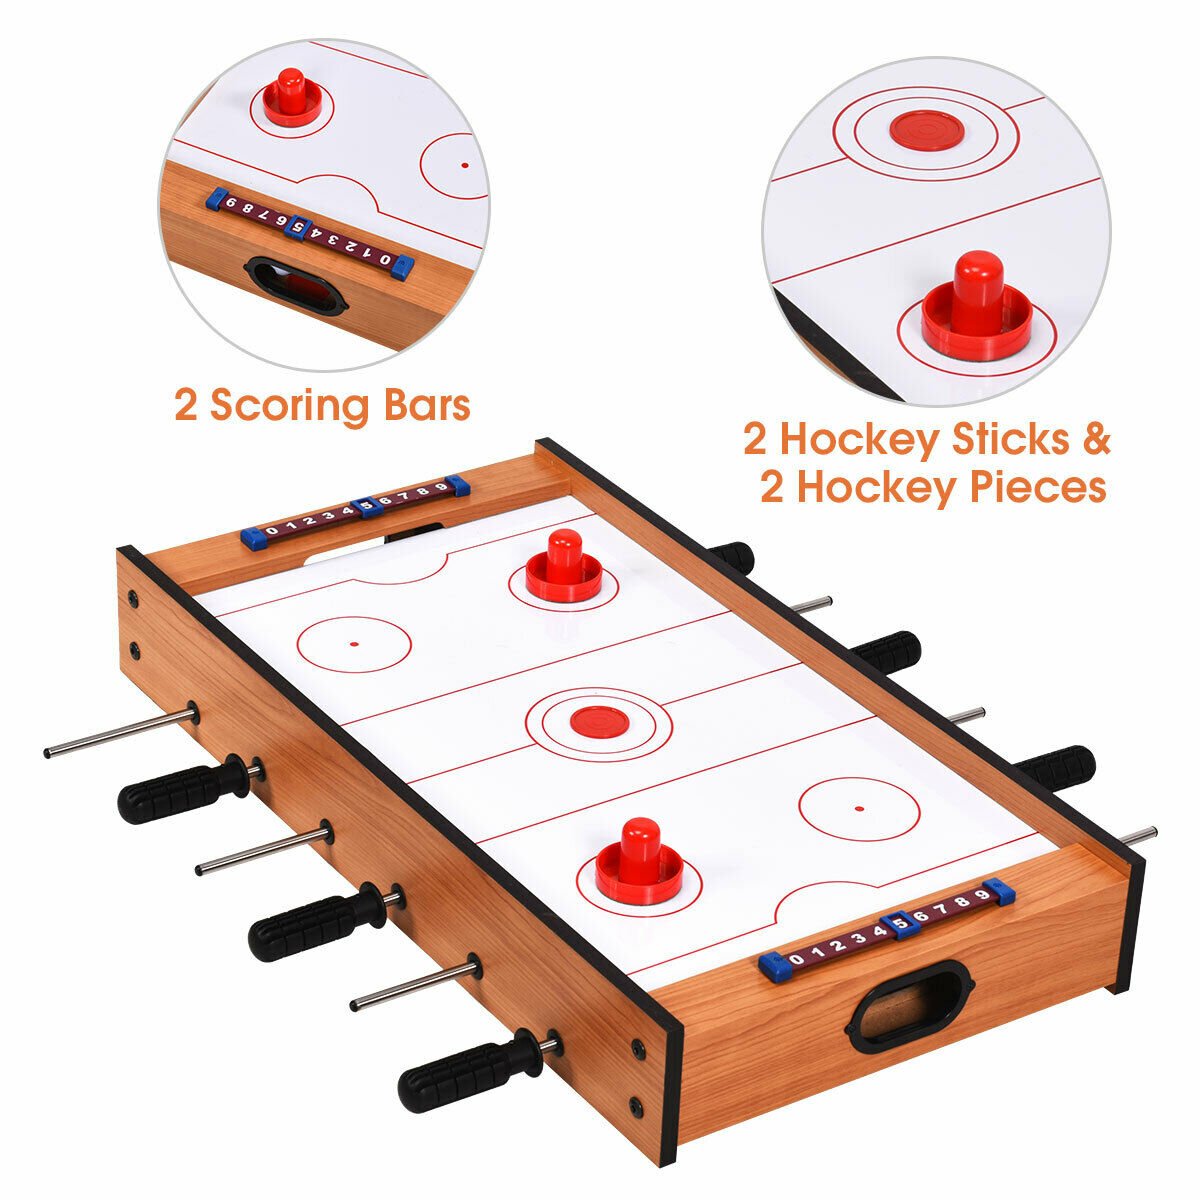 Football Table Fun for Everyone - Get Yours Today!